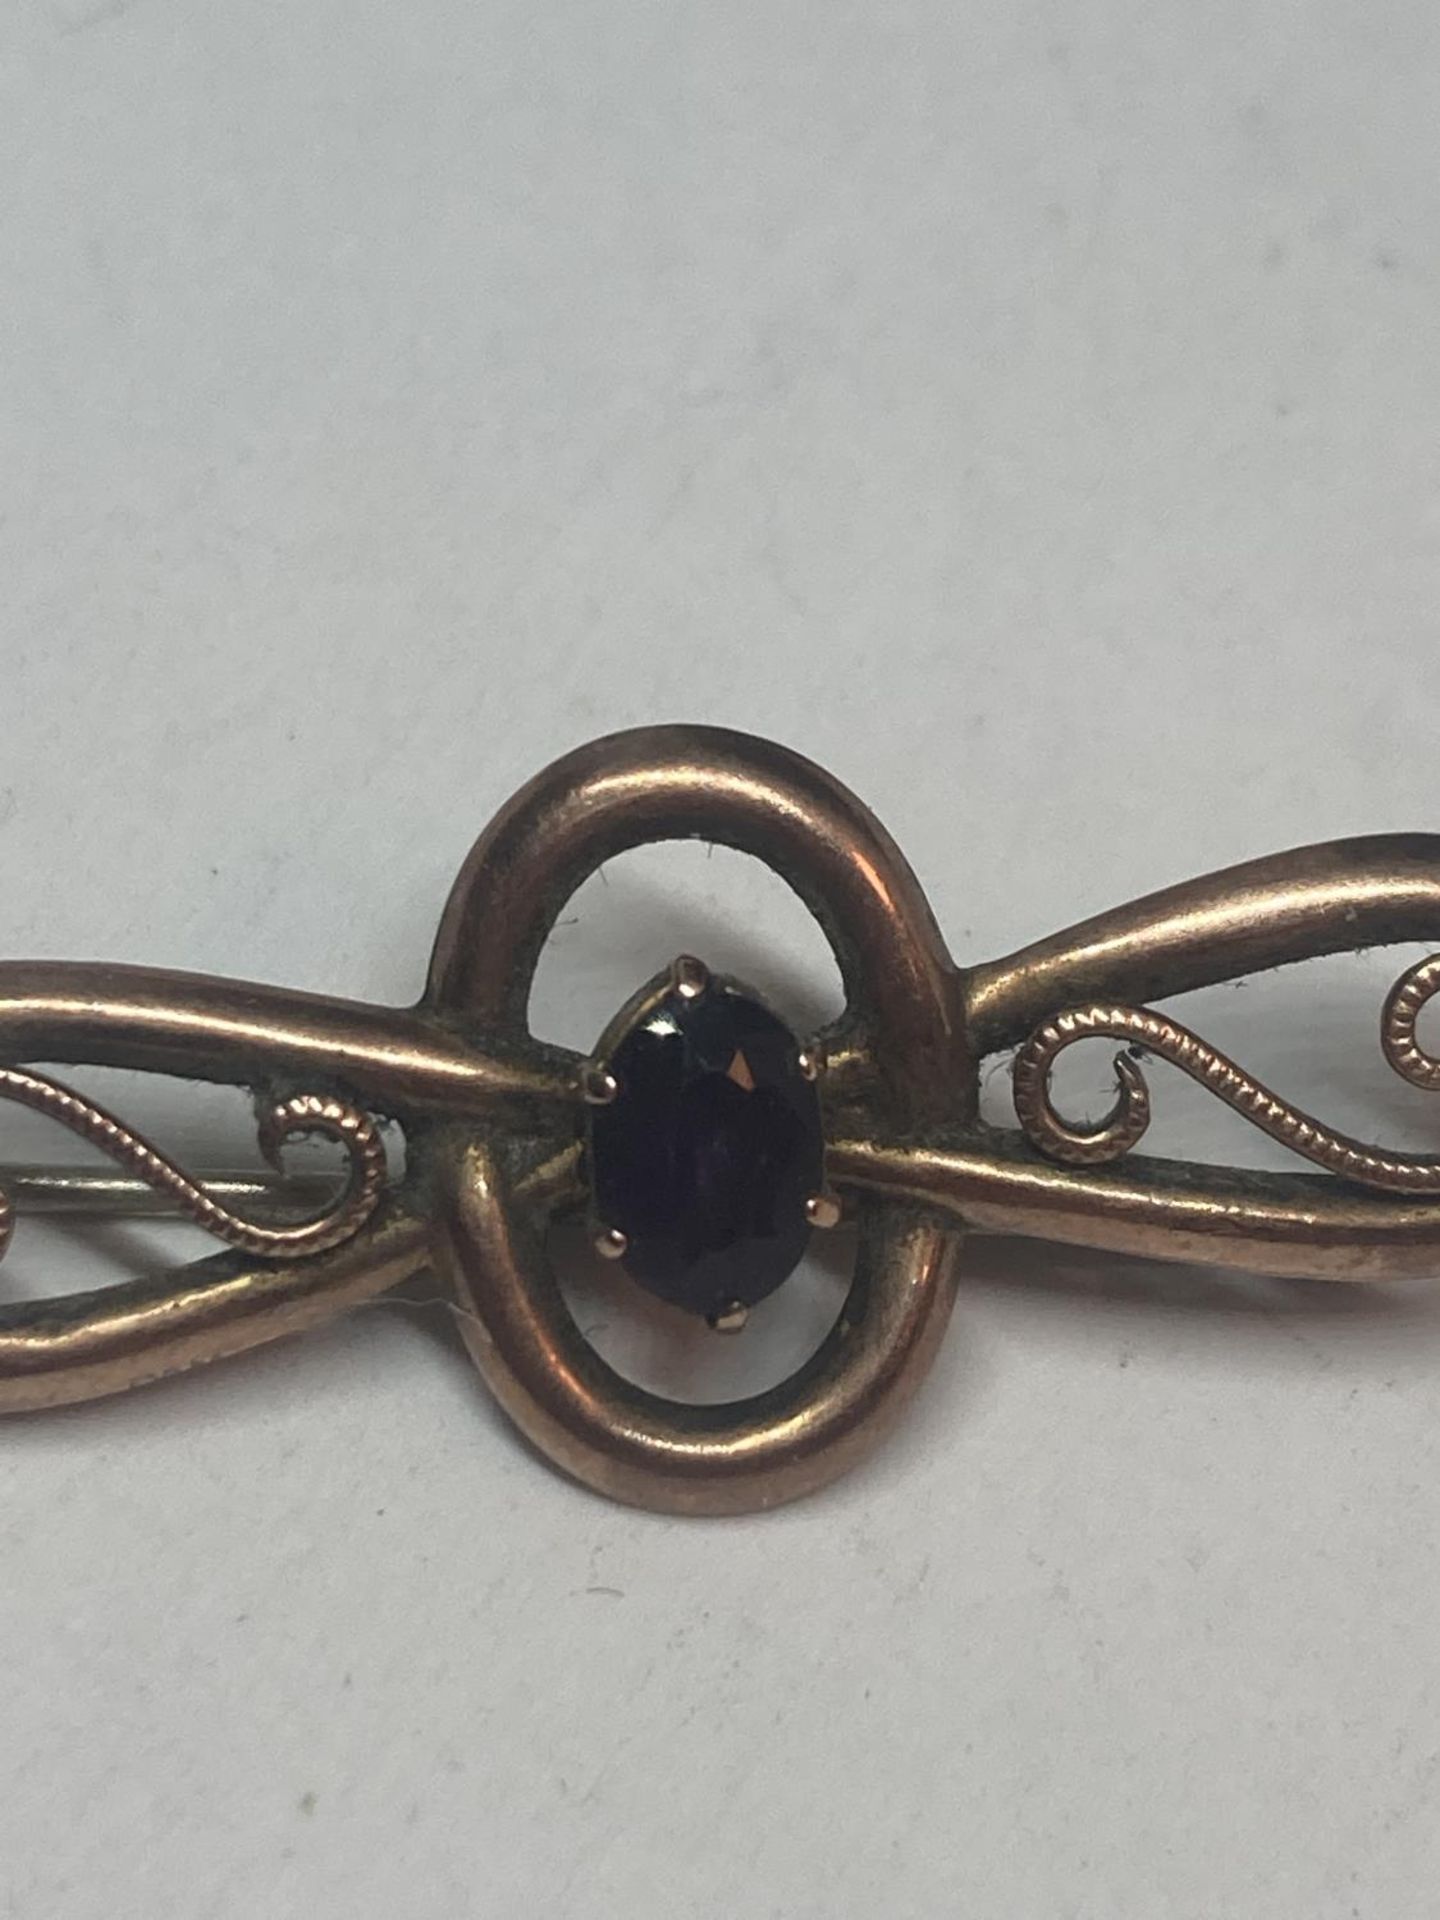 A 9 CARAT GOLD VINTAGE BROOCH WITH A SINGLE PURPLE STONE GROSS WEIGHT 2.05 GRAMS - Image 4 of 10